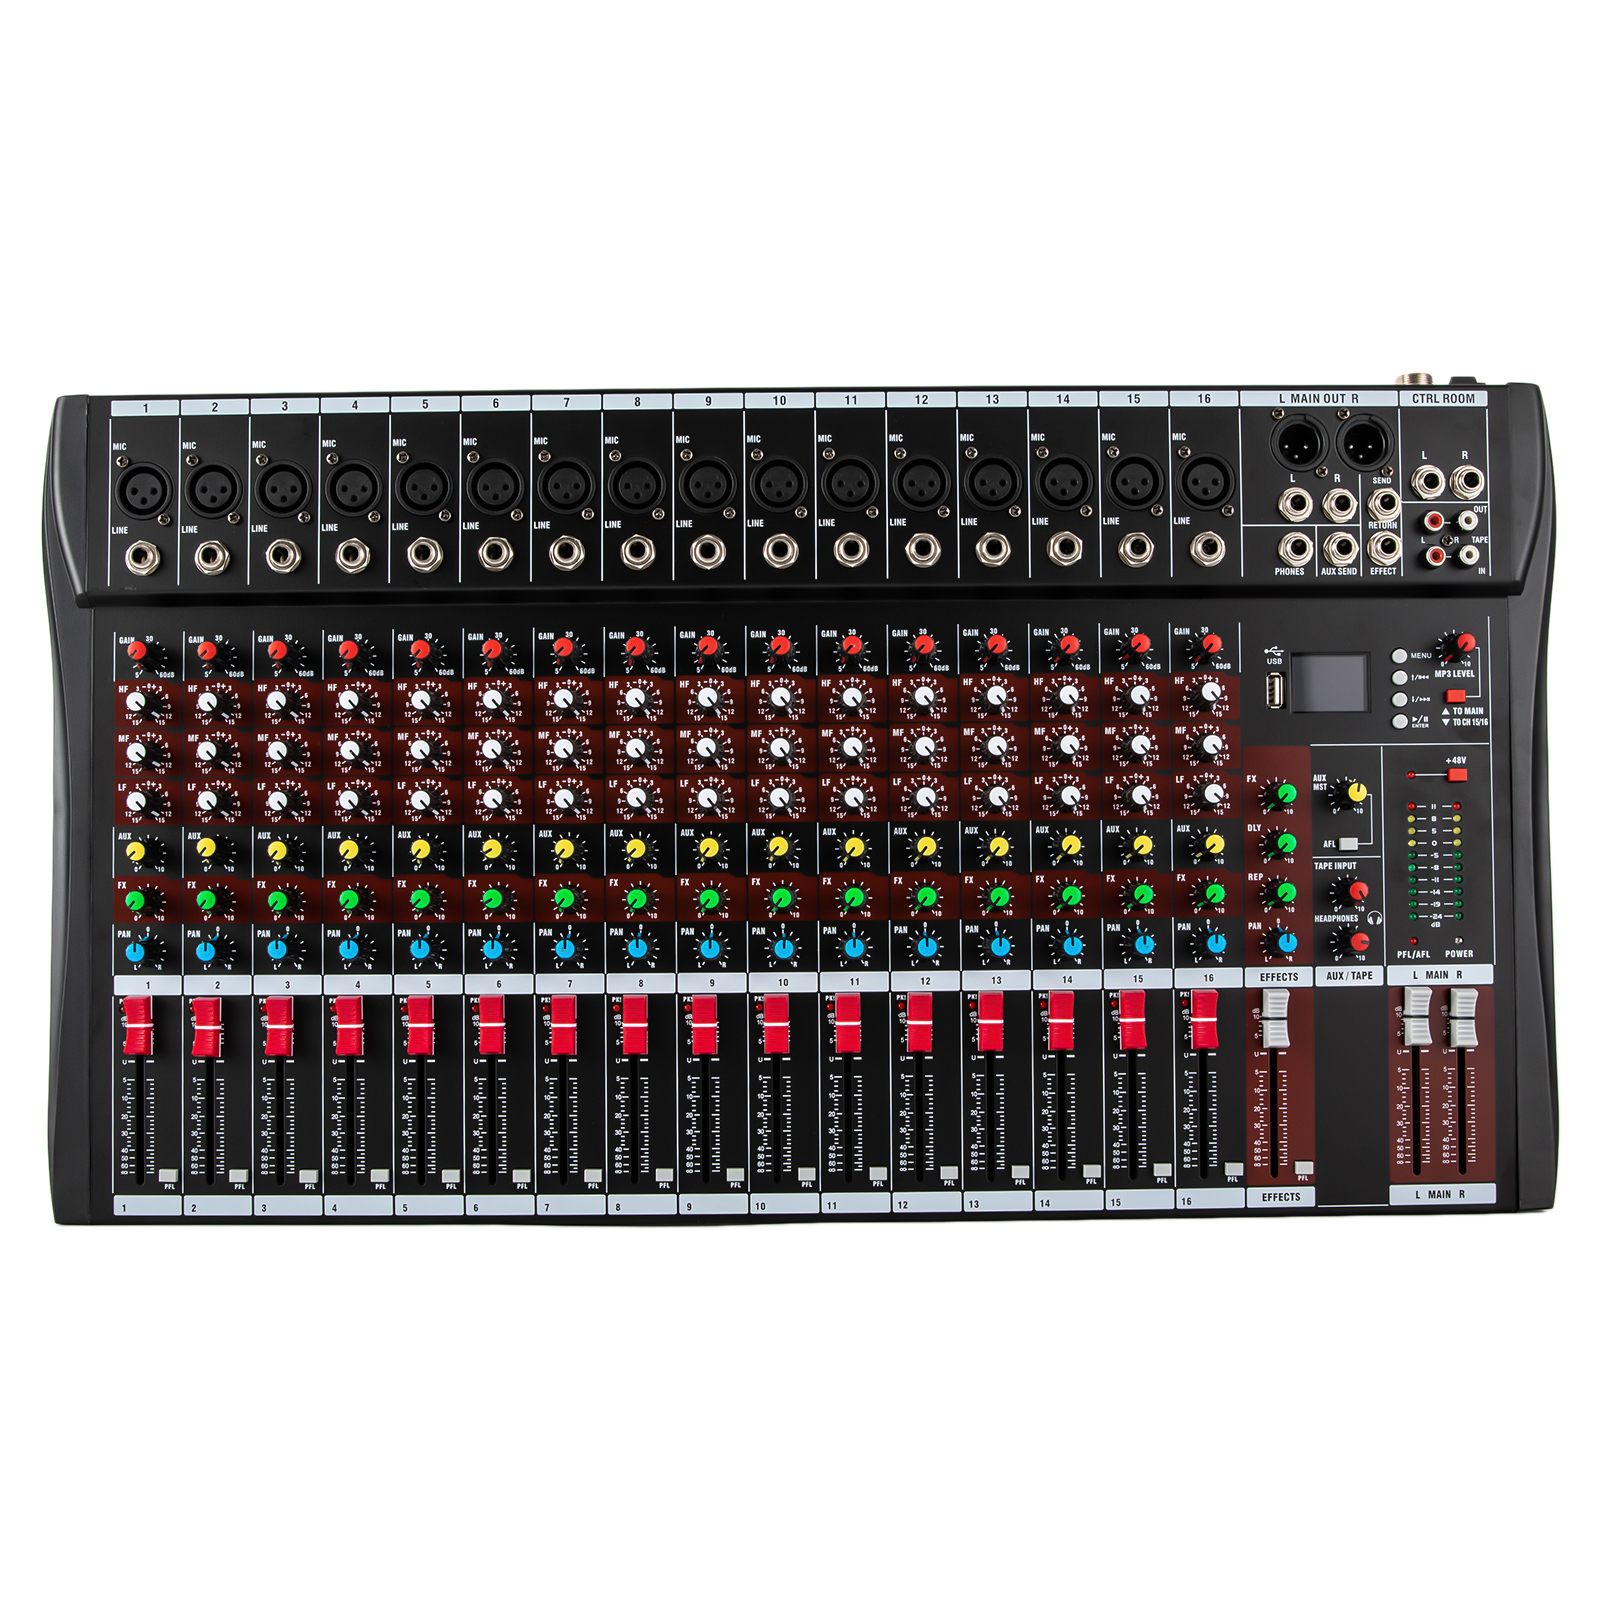 Miumaeov Bluetooth Studio Audio Mixer Sound Mixing Console Desk System Interface w/USB Drive for PC Recording Input AC 110V 50Hz 18W for Professional and Beginners Recording Function (16 Channel) - image 5 of 13